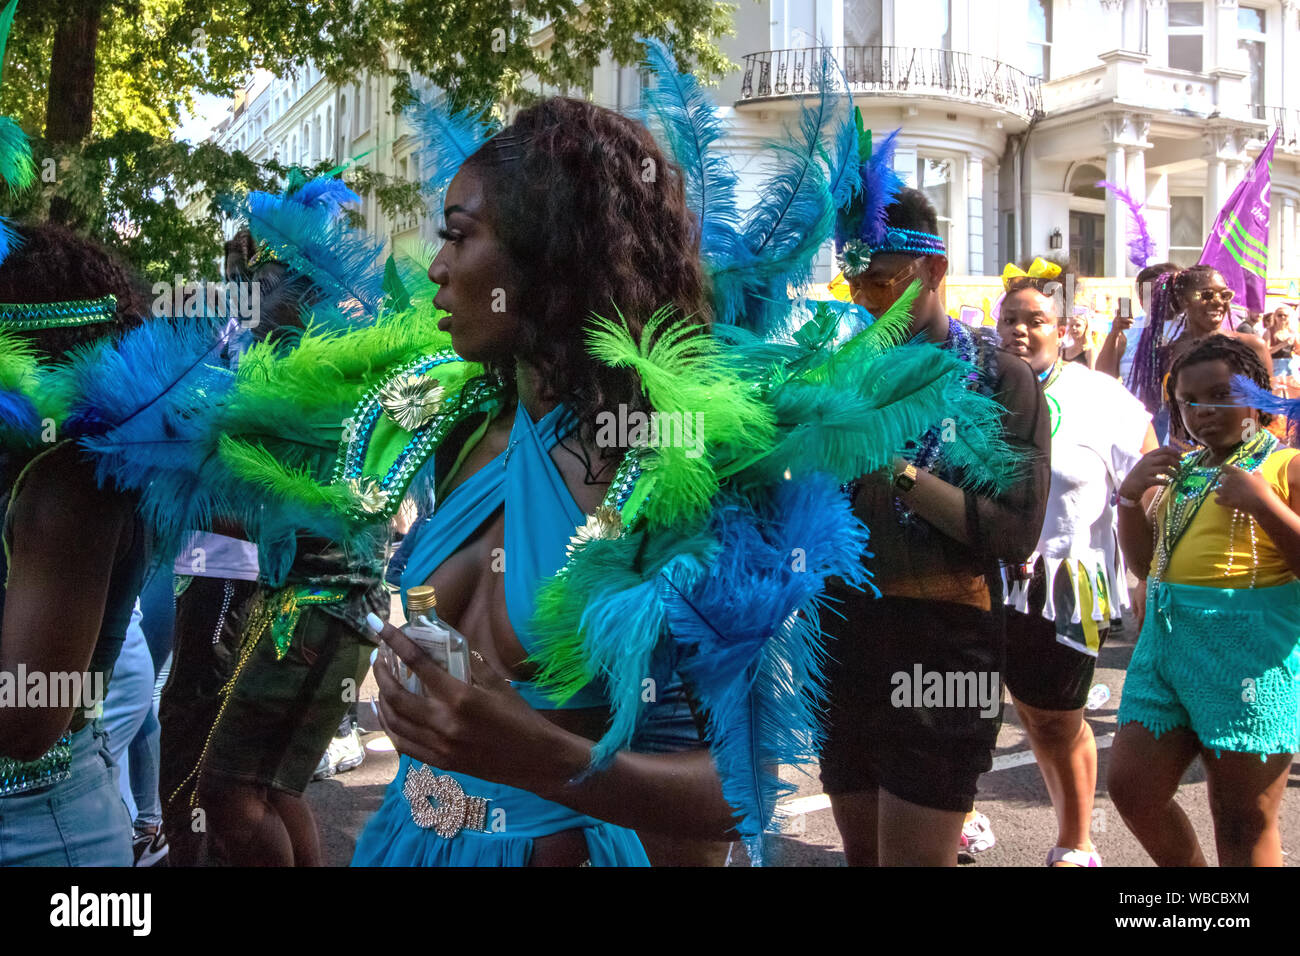 Masqueraders behind a truck. The main events of Notting Hill Carnival 2019 got underway on Sunday, with over a million revellers hitting the streets of West London, amongst floats, masqueraders, steel bands, and sound systems. Stock Photo